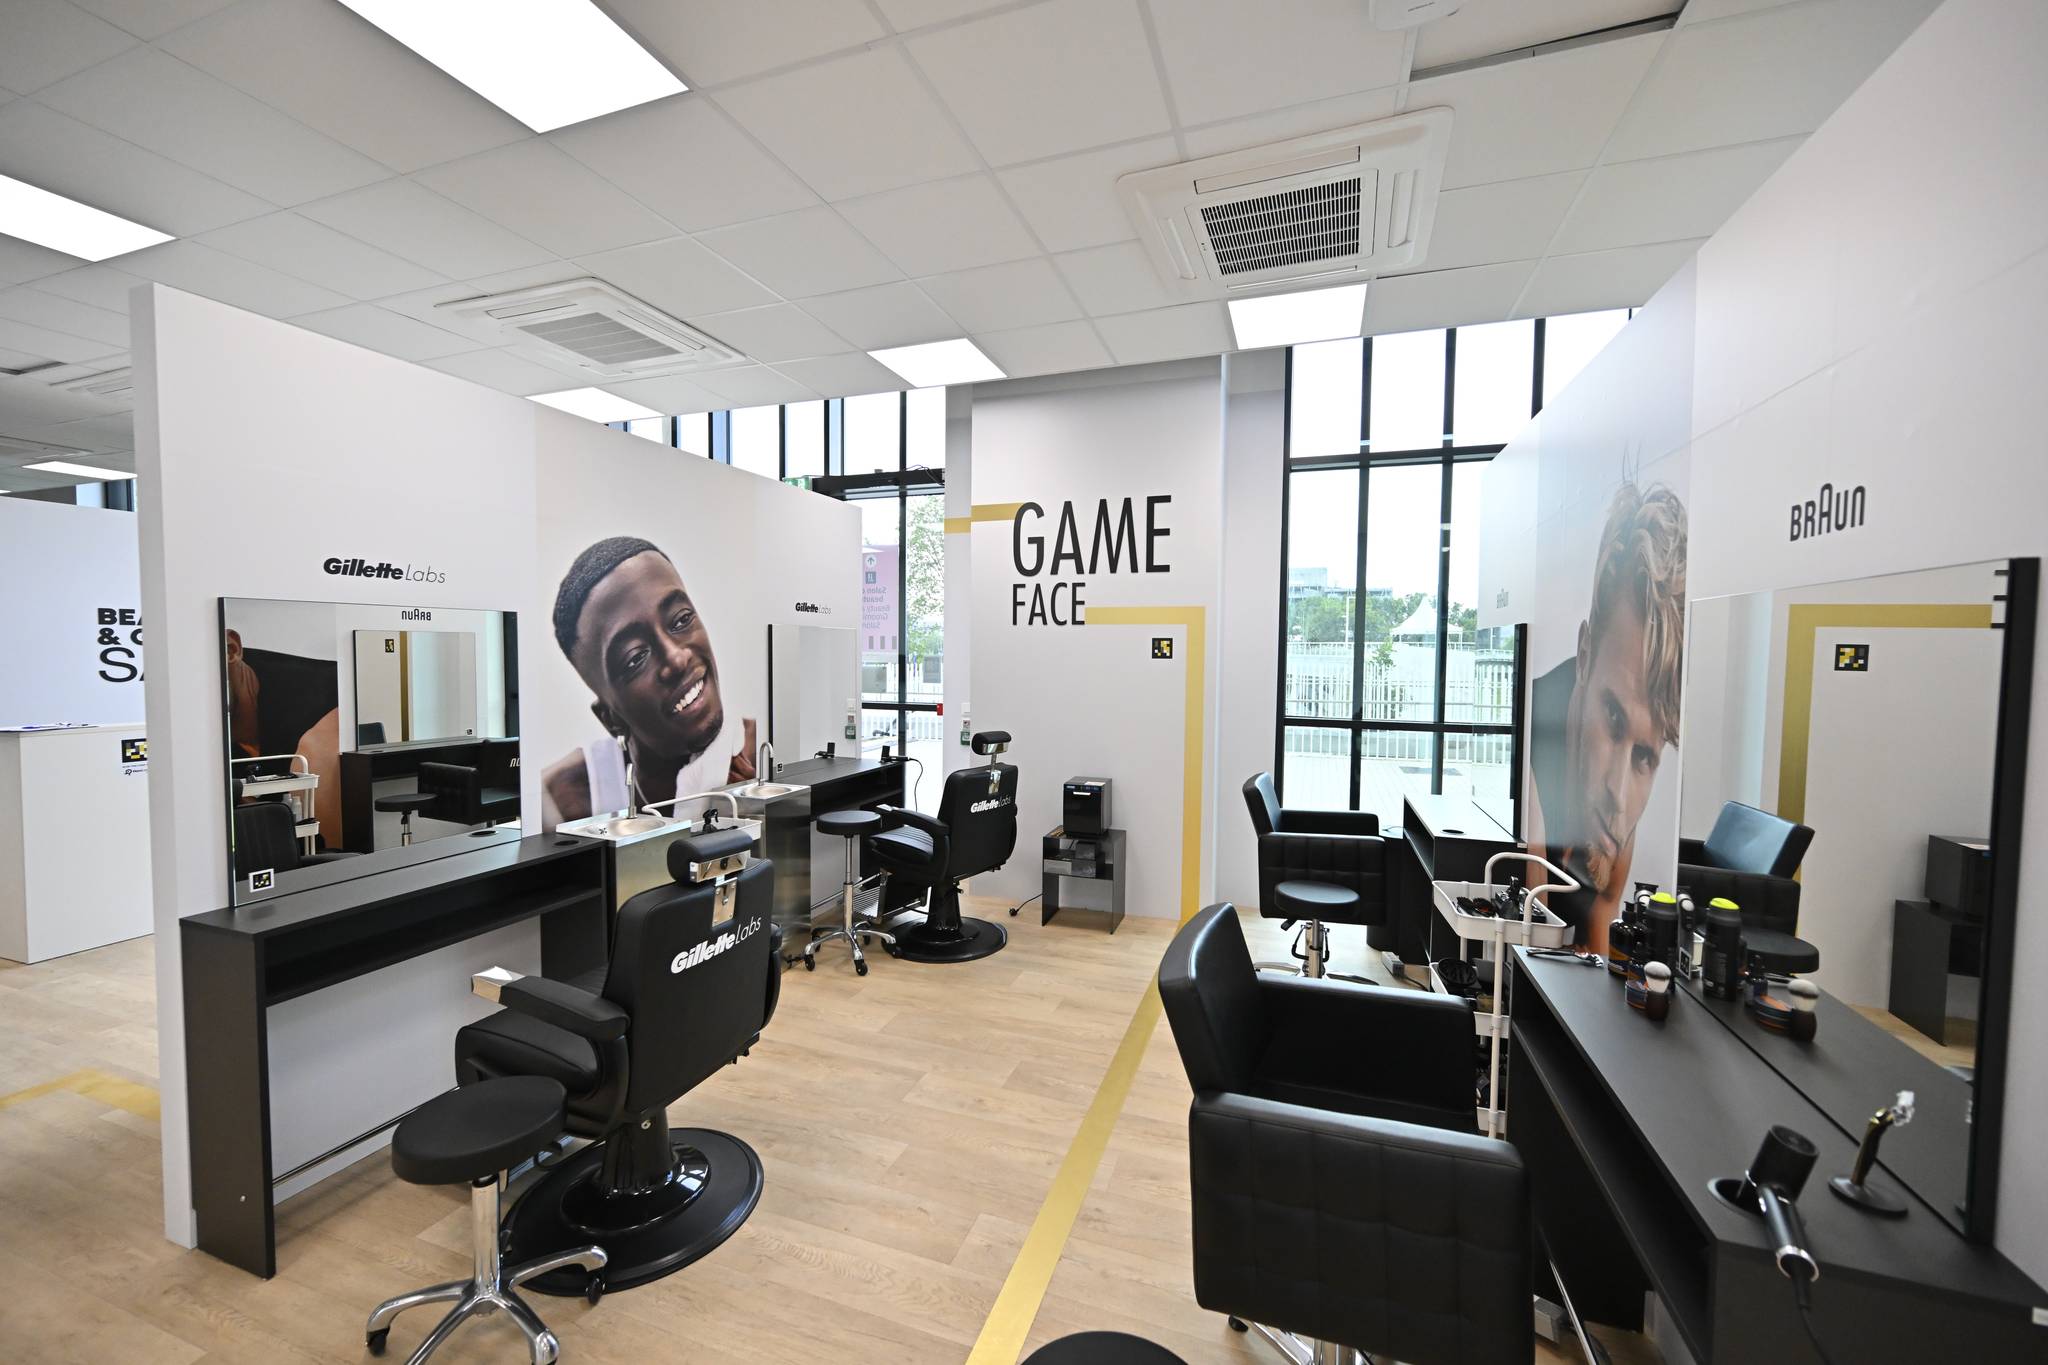 P&G caters to Olympic athletes with diverse beauty salon